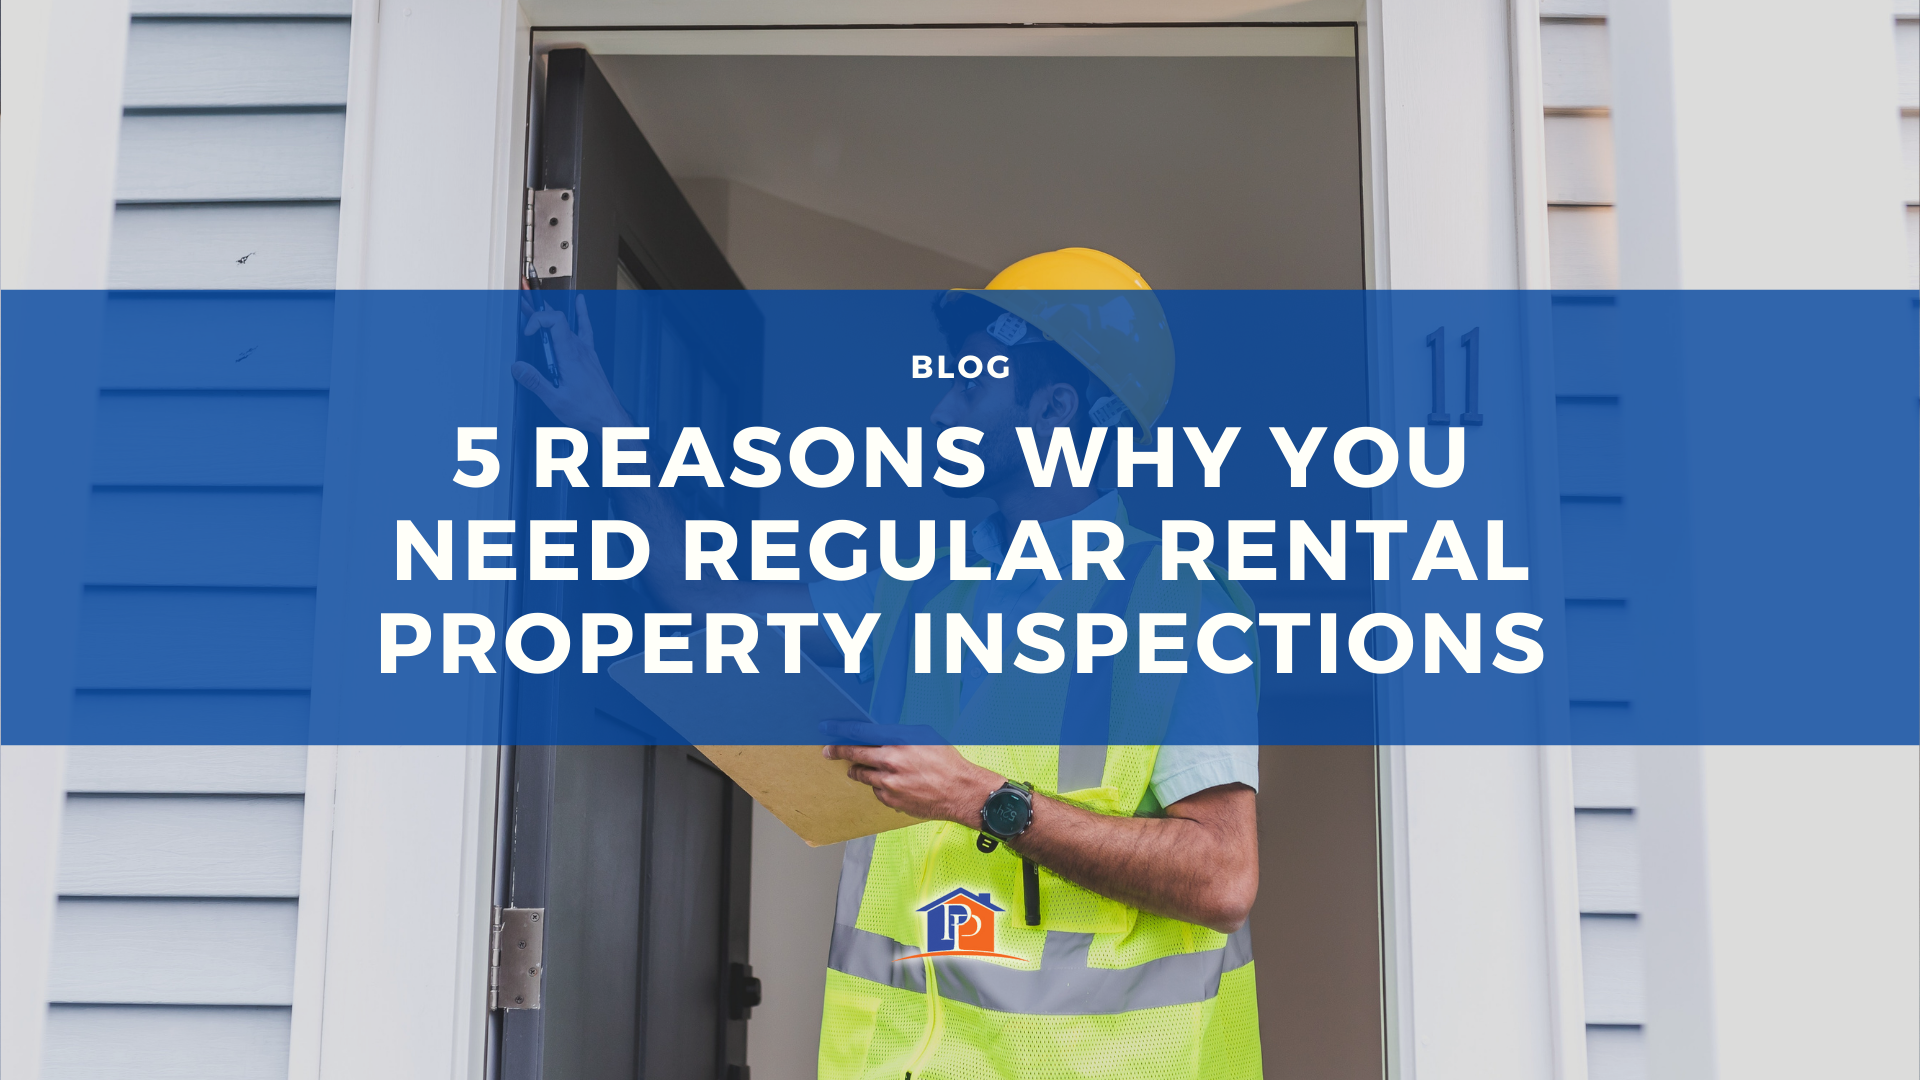 5 Reasons Why You Need Regular Rental Property Inspections